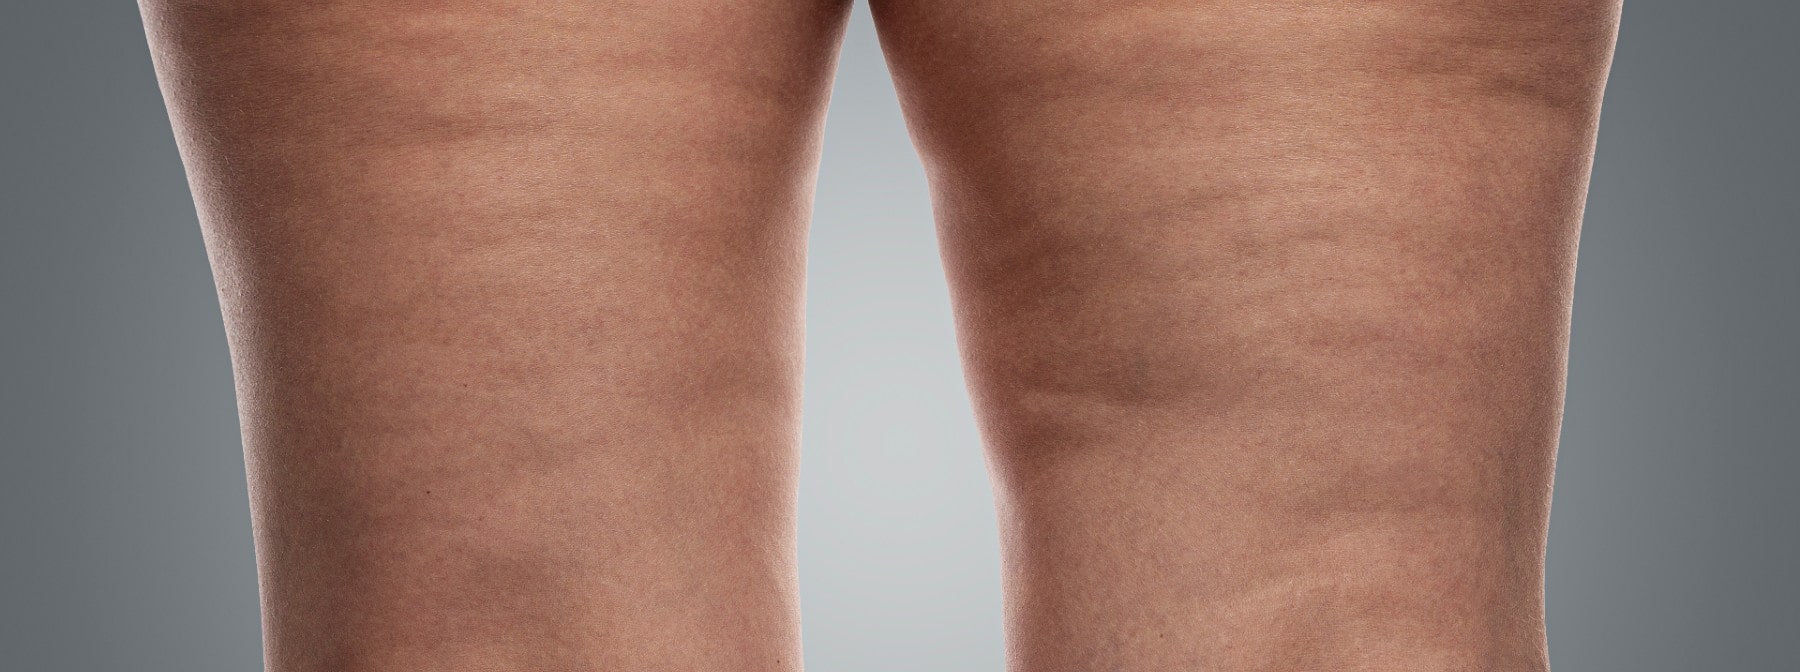 Getting “Rid” Of Cellulite: Science Fact Or Fiction